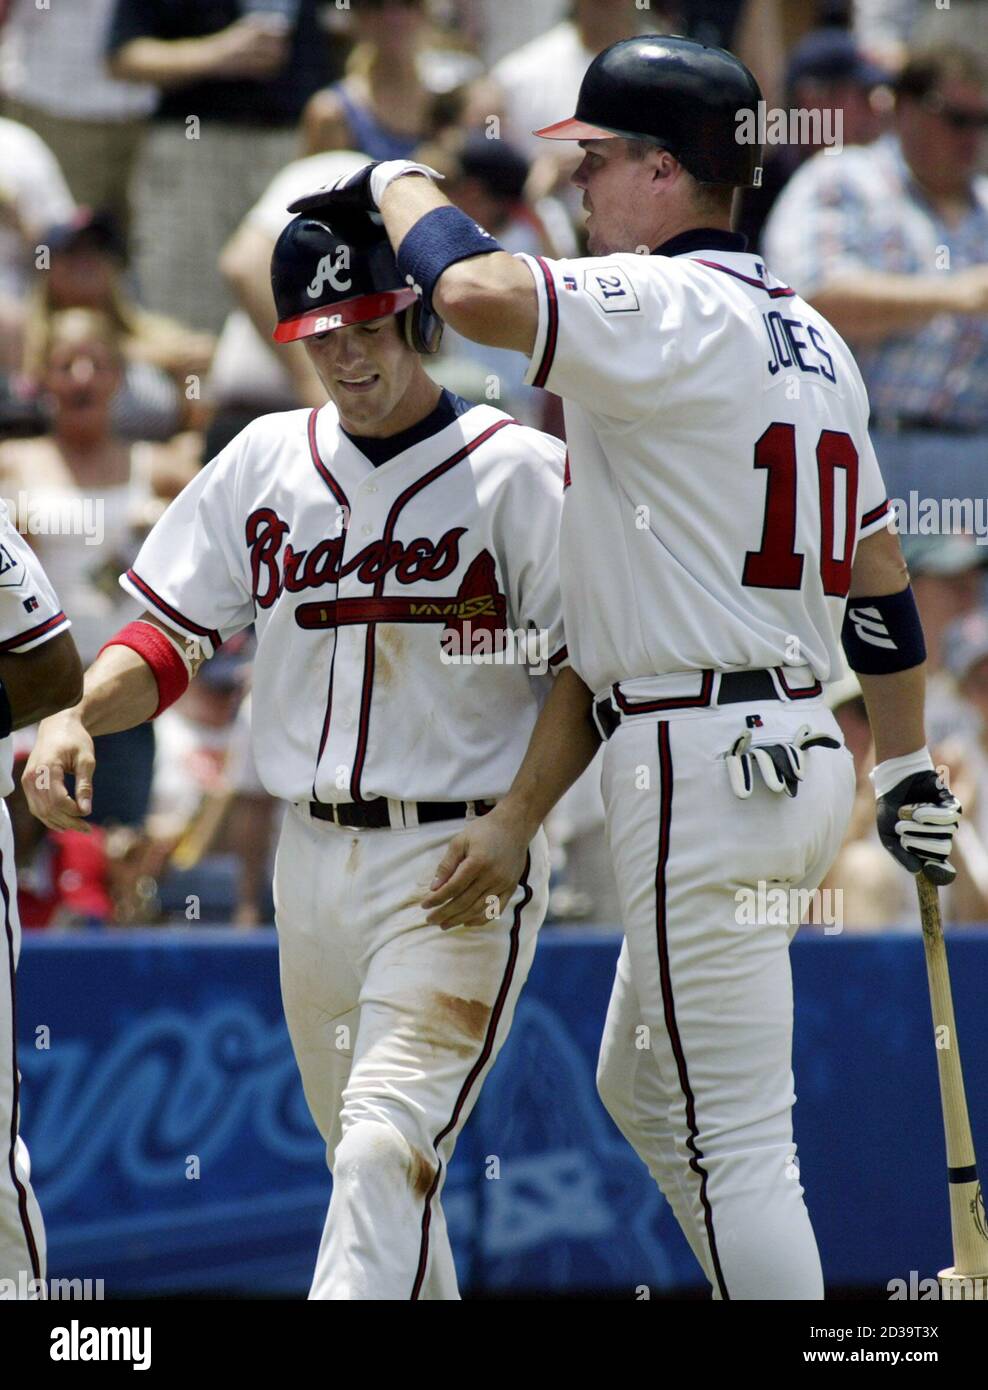 Atlanta Braves' Chipper Jones (R) congratulates teammate Nick Green after  Green scored on a hit by J.D. Drew in the fifth inning off Boston Red Sox  pitcher Derek Lowe, July 4, 2004.